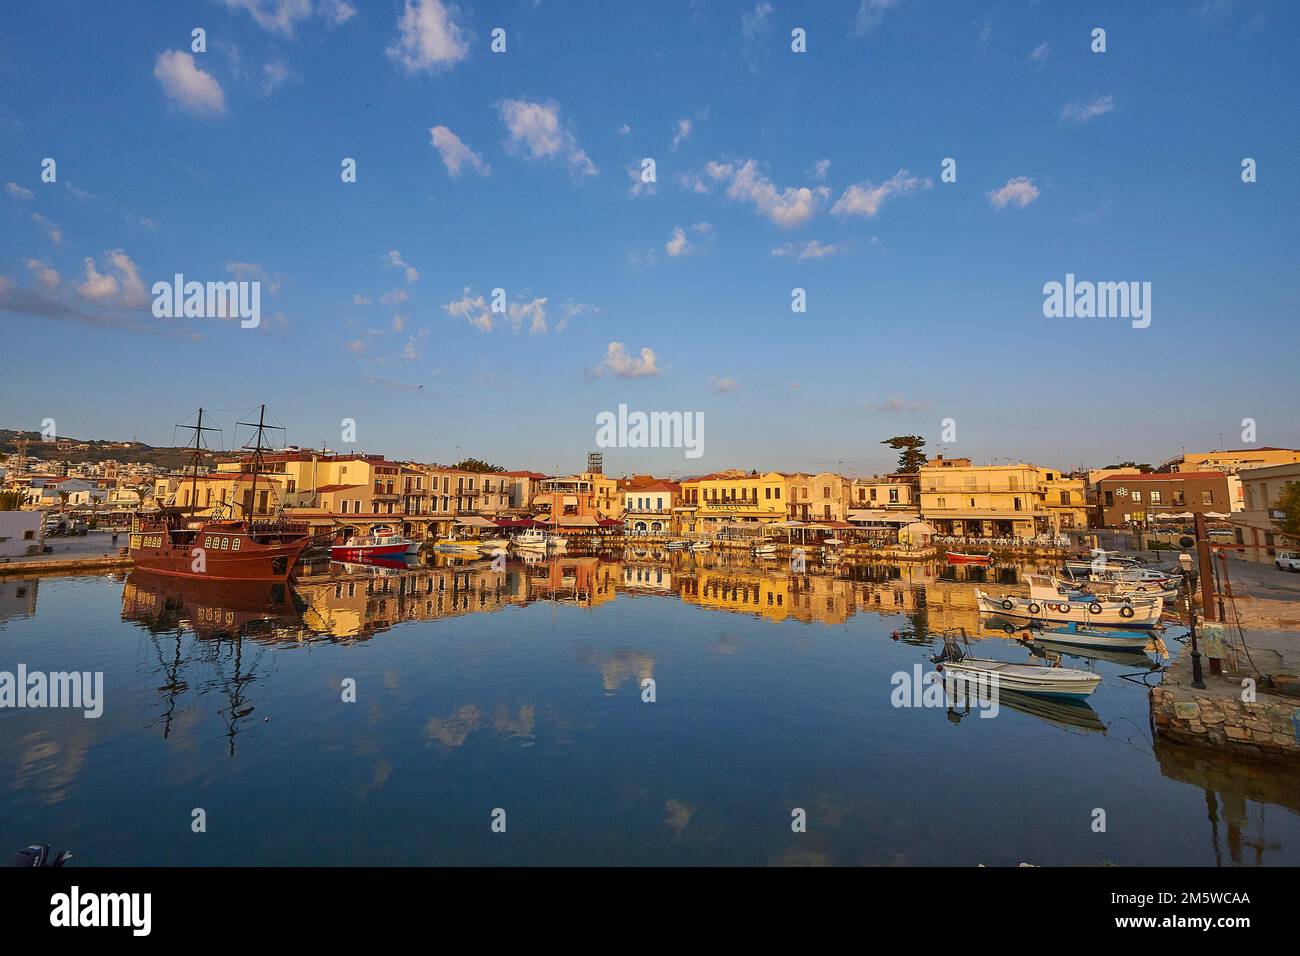 Morning light, sunrise, Venetian harbour, row of houses, colourful houses, reflections in the water, blue sky, few grey-white clouds, Rethimnon Stock Photo